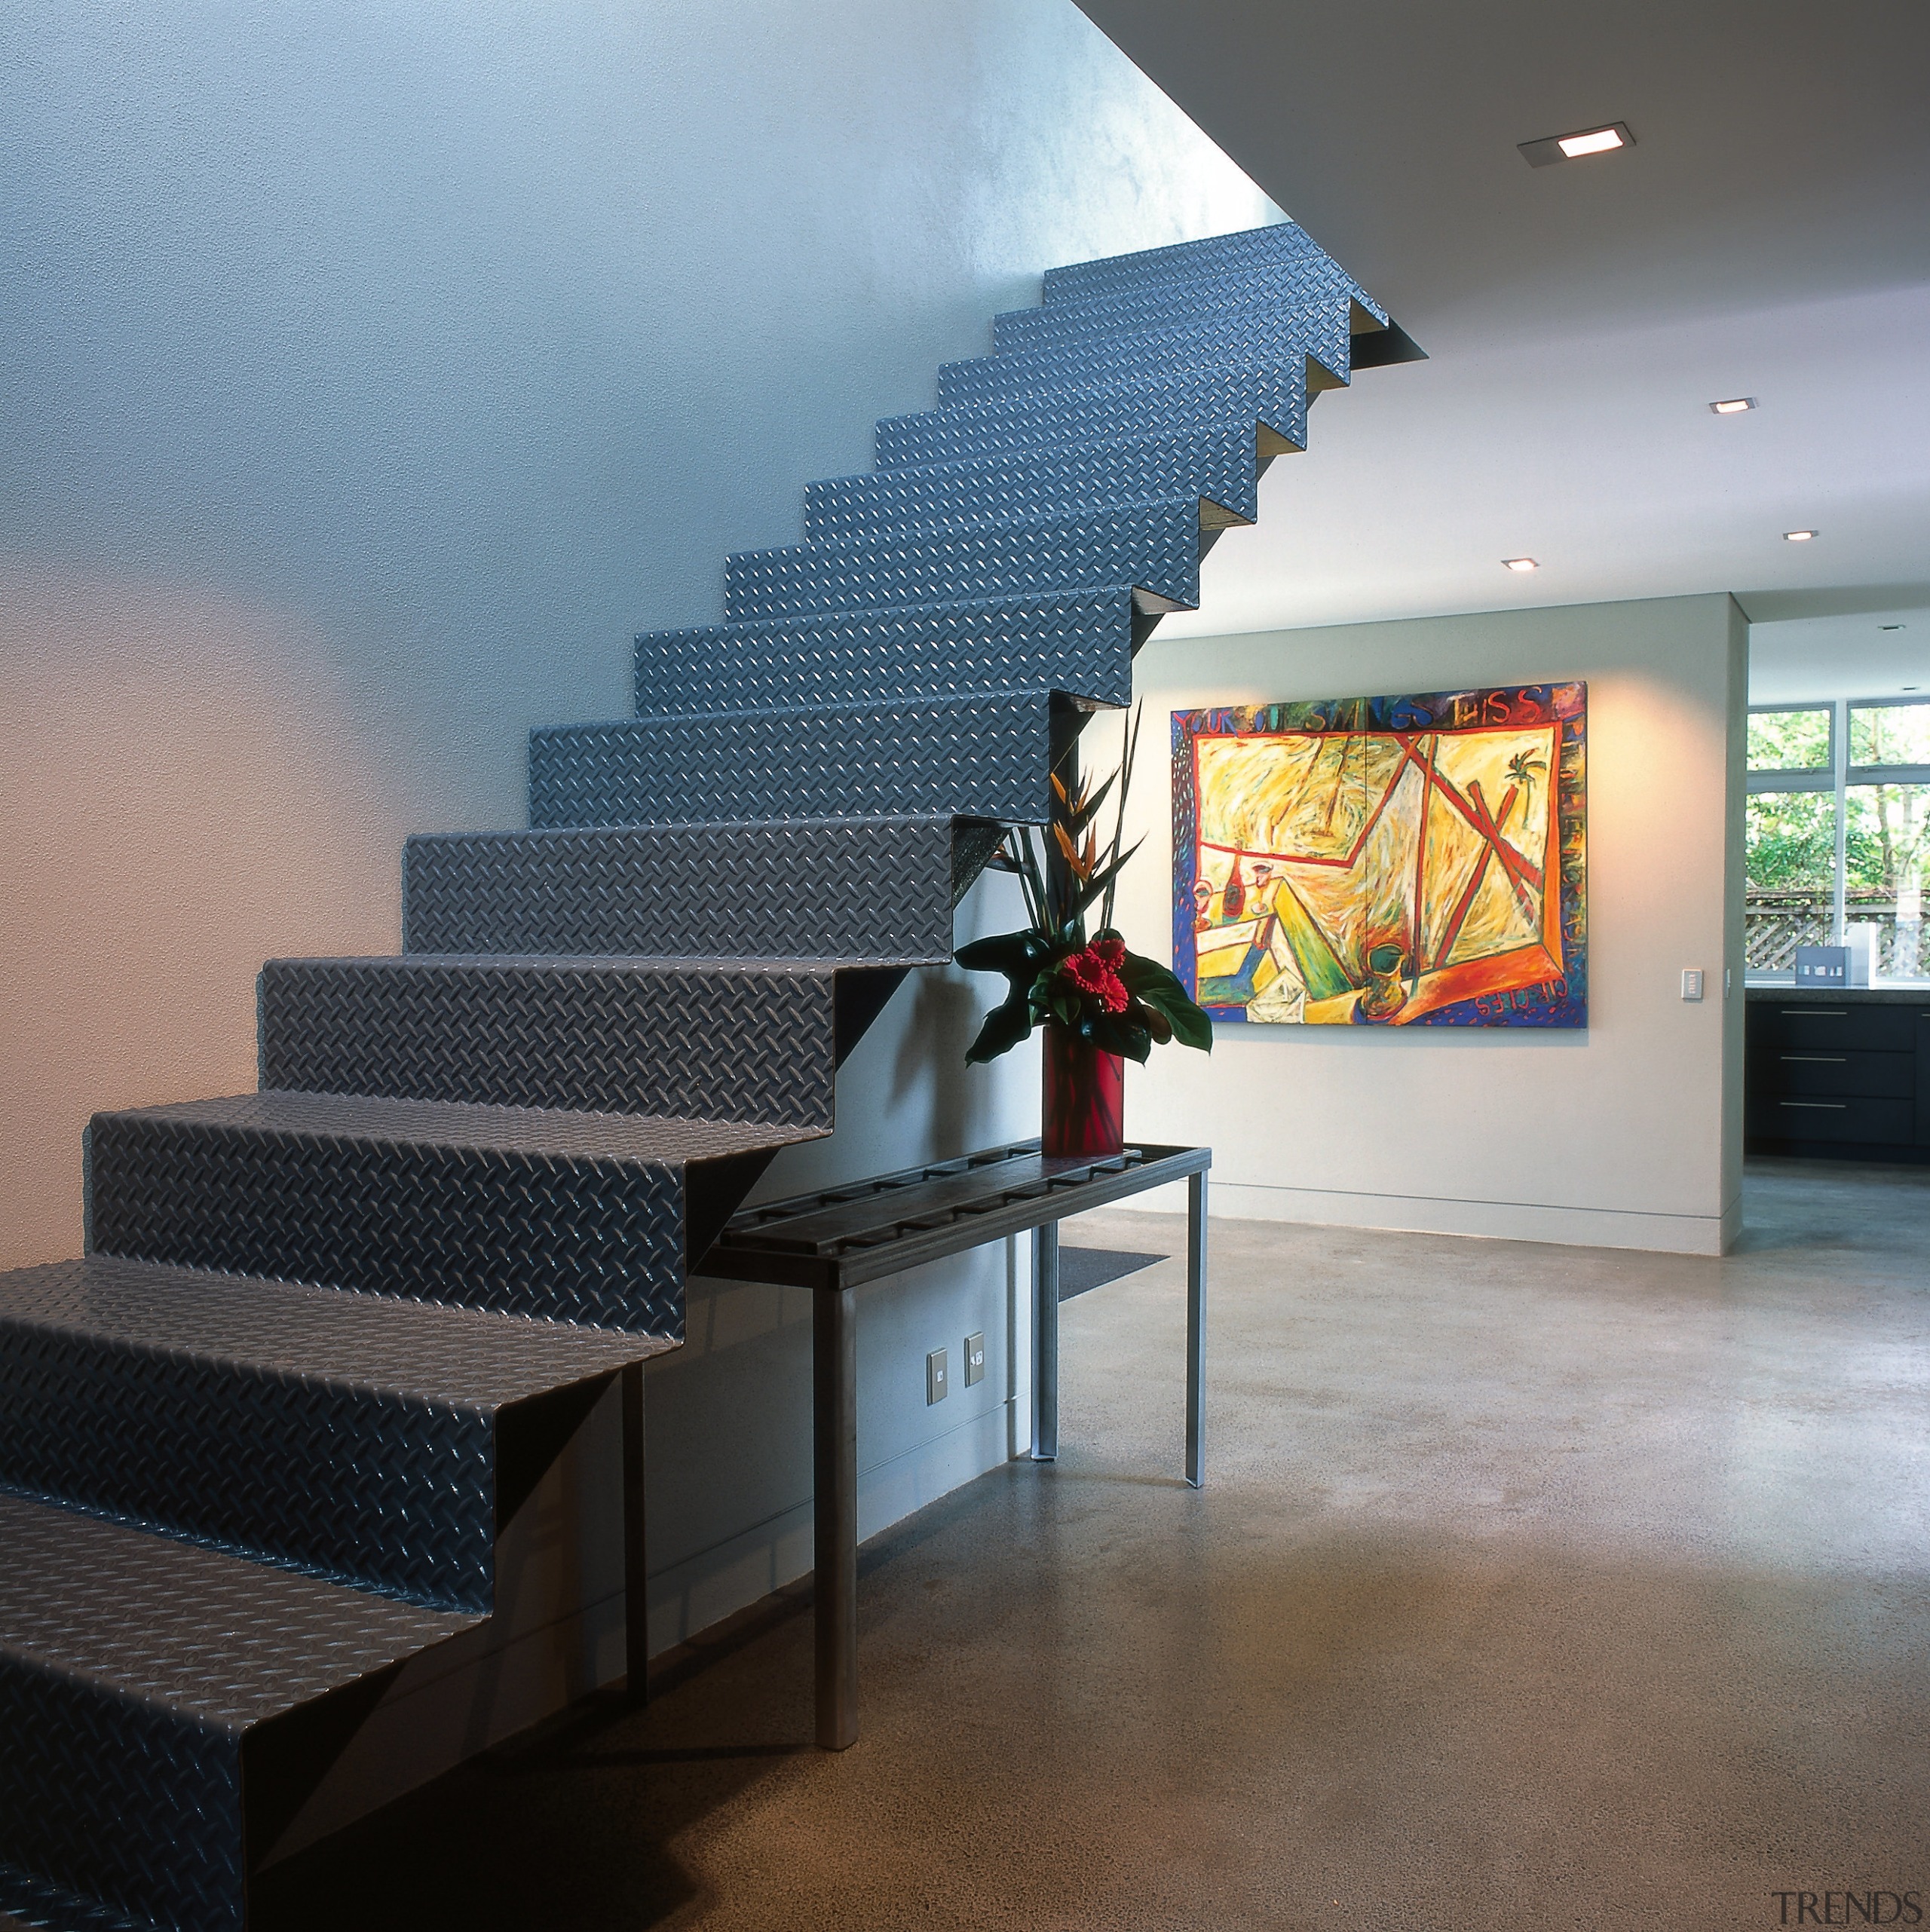 View of a steel staircase, polished concrete floor, architecture, daylighting, floor, handrail, interior design, stairs, tourist attraction, wall, gray